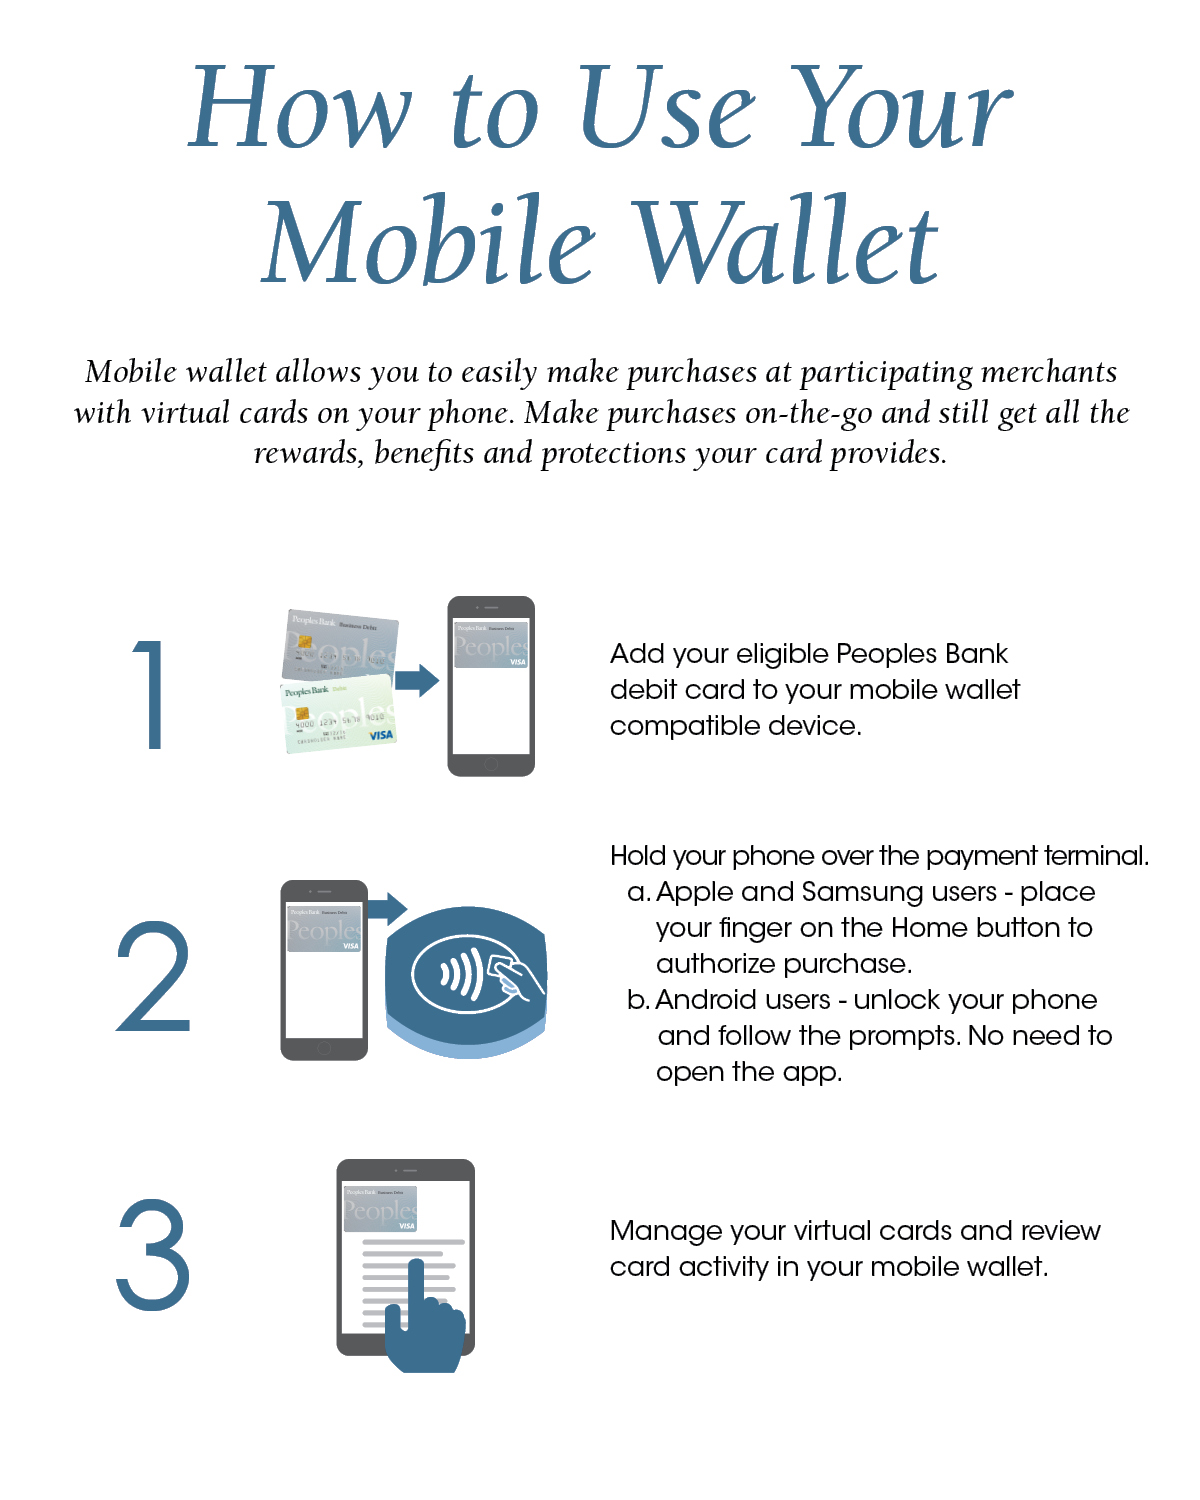 How to Use Your Mobile Wallet